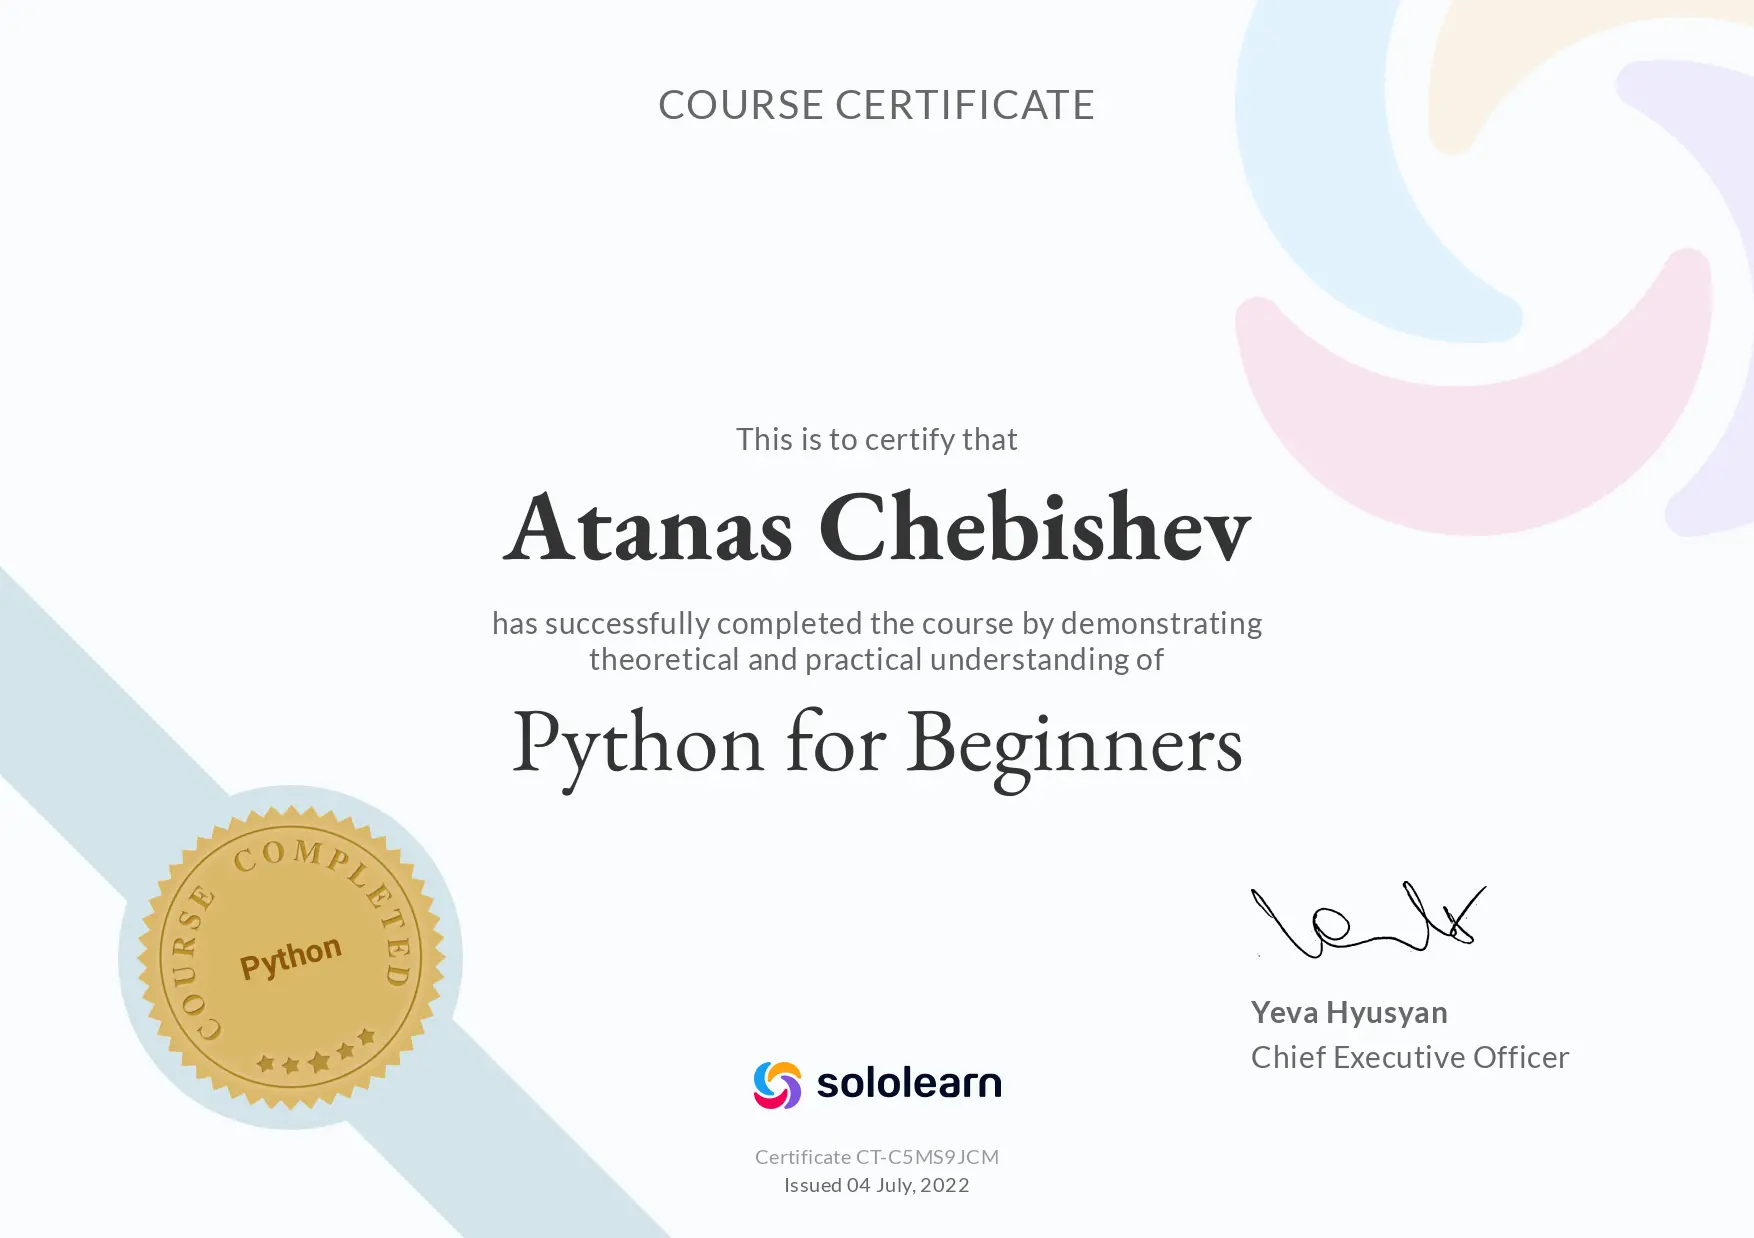 Sololearn Python for Beginners certificate